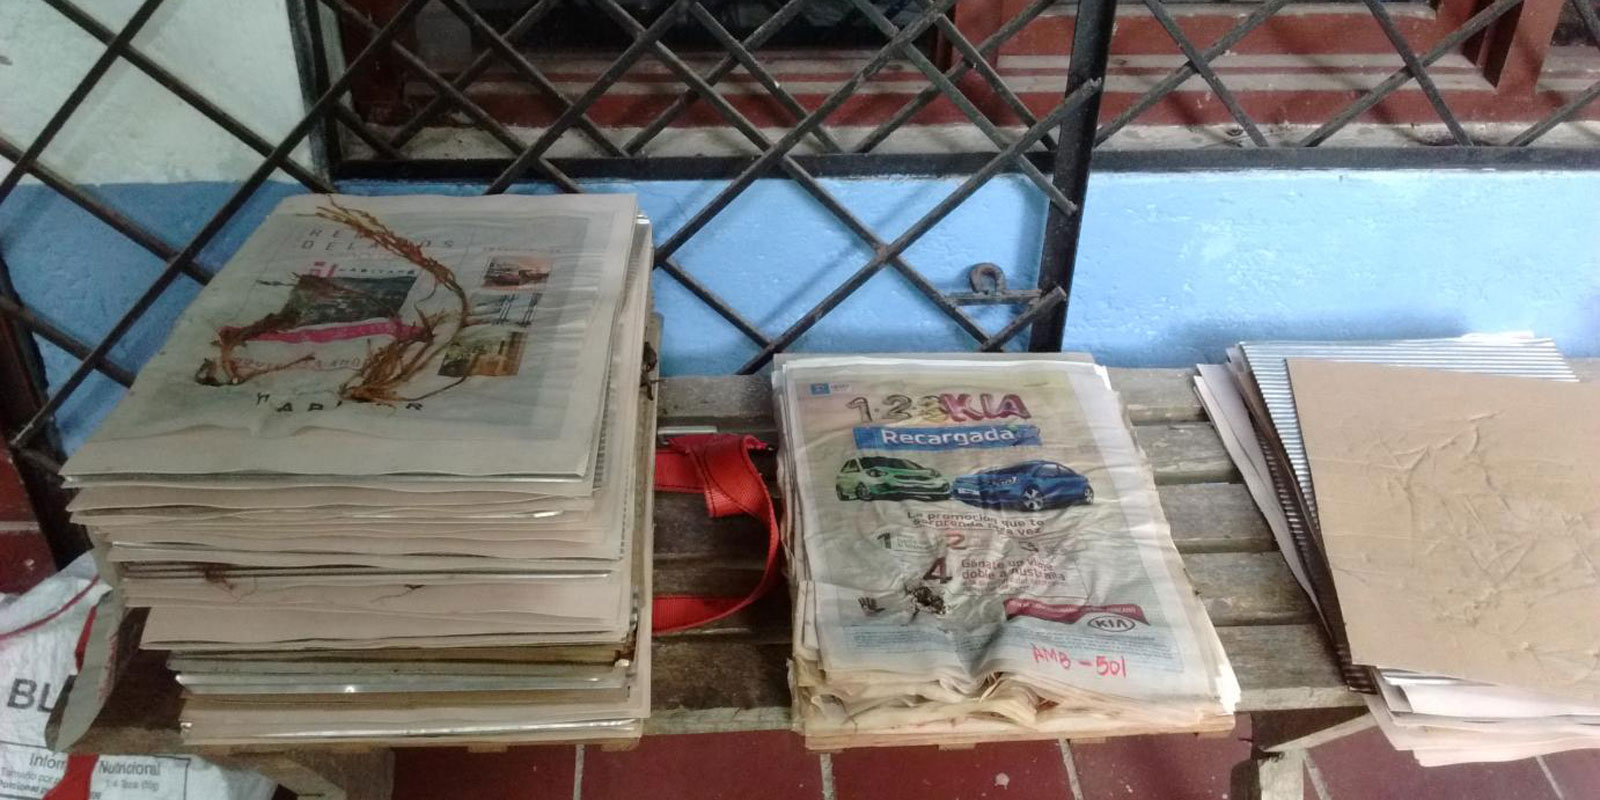 Two piles of newspaper with pressed plants in between the pages